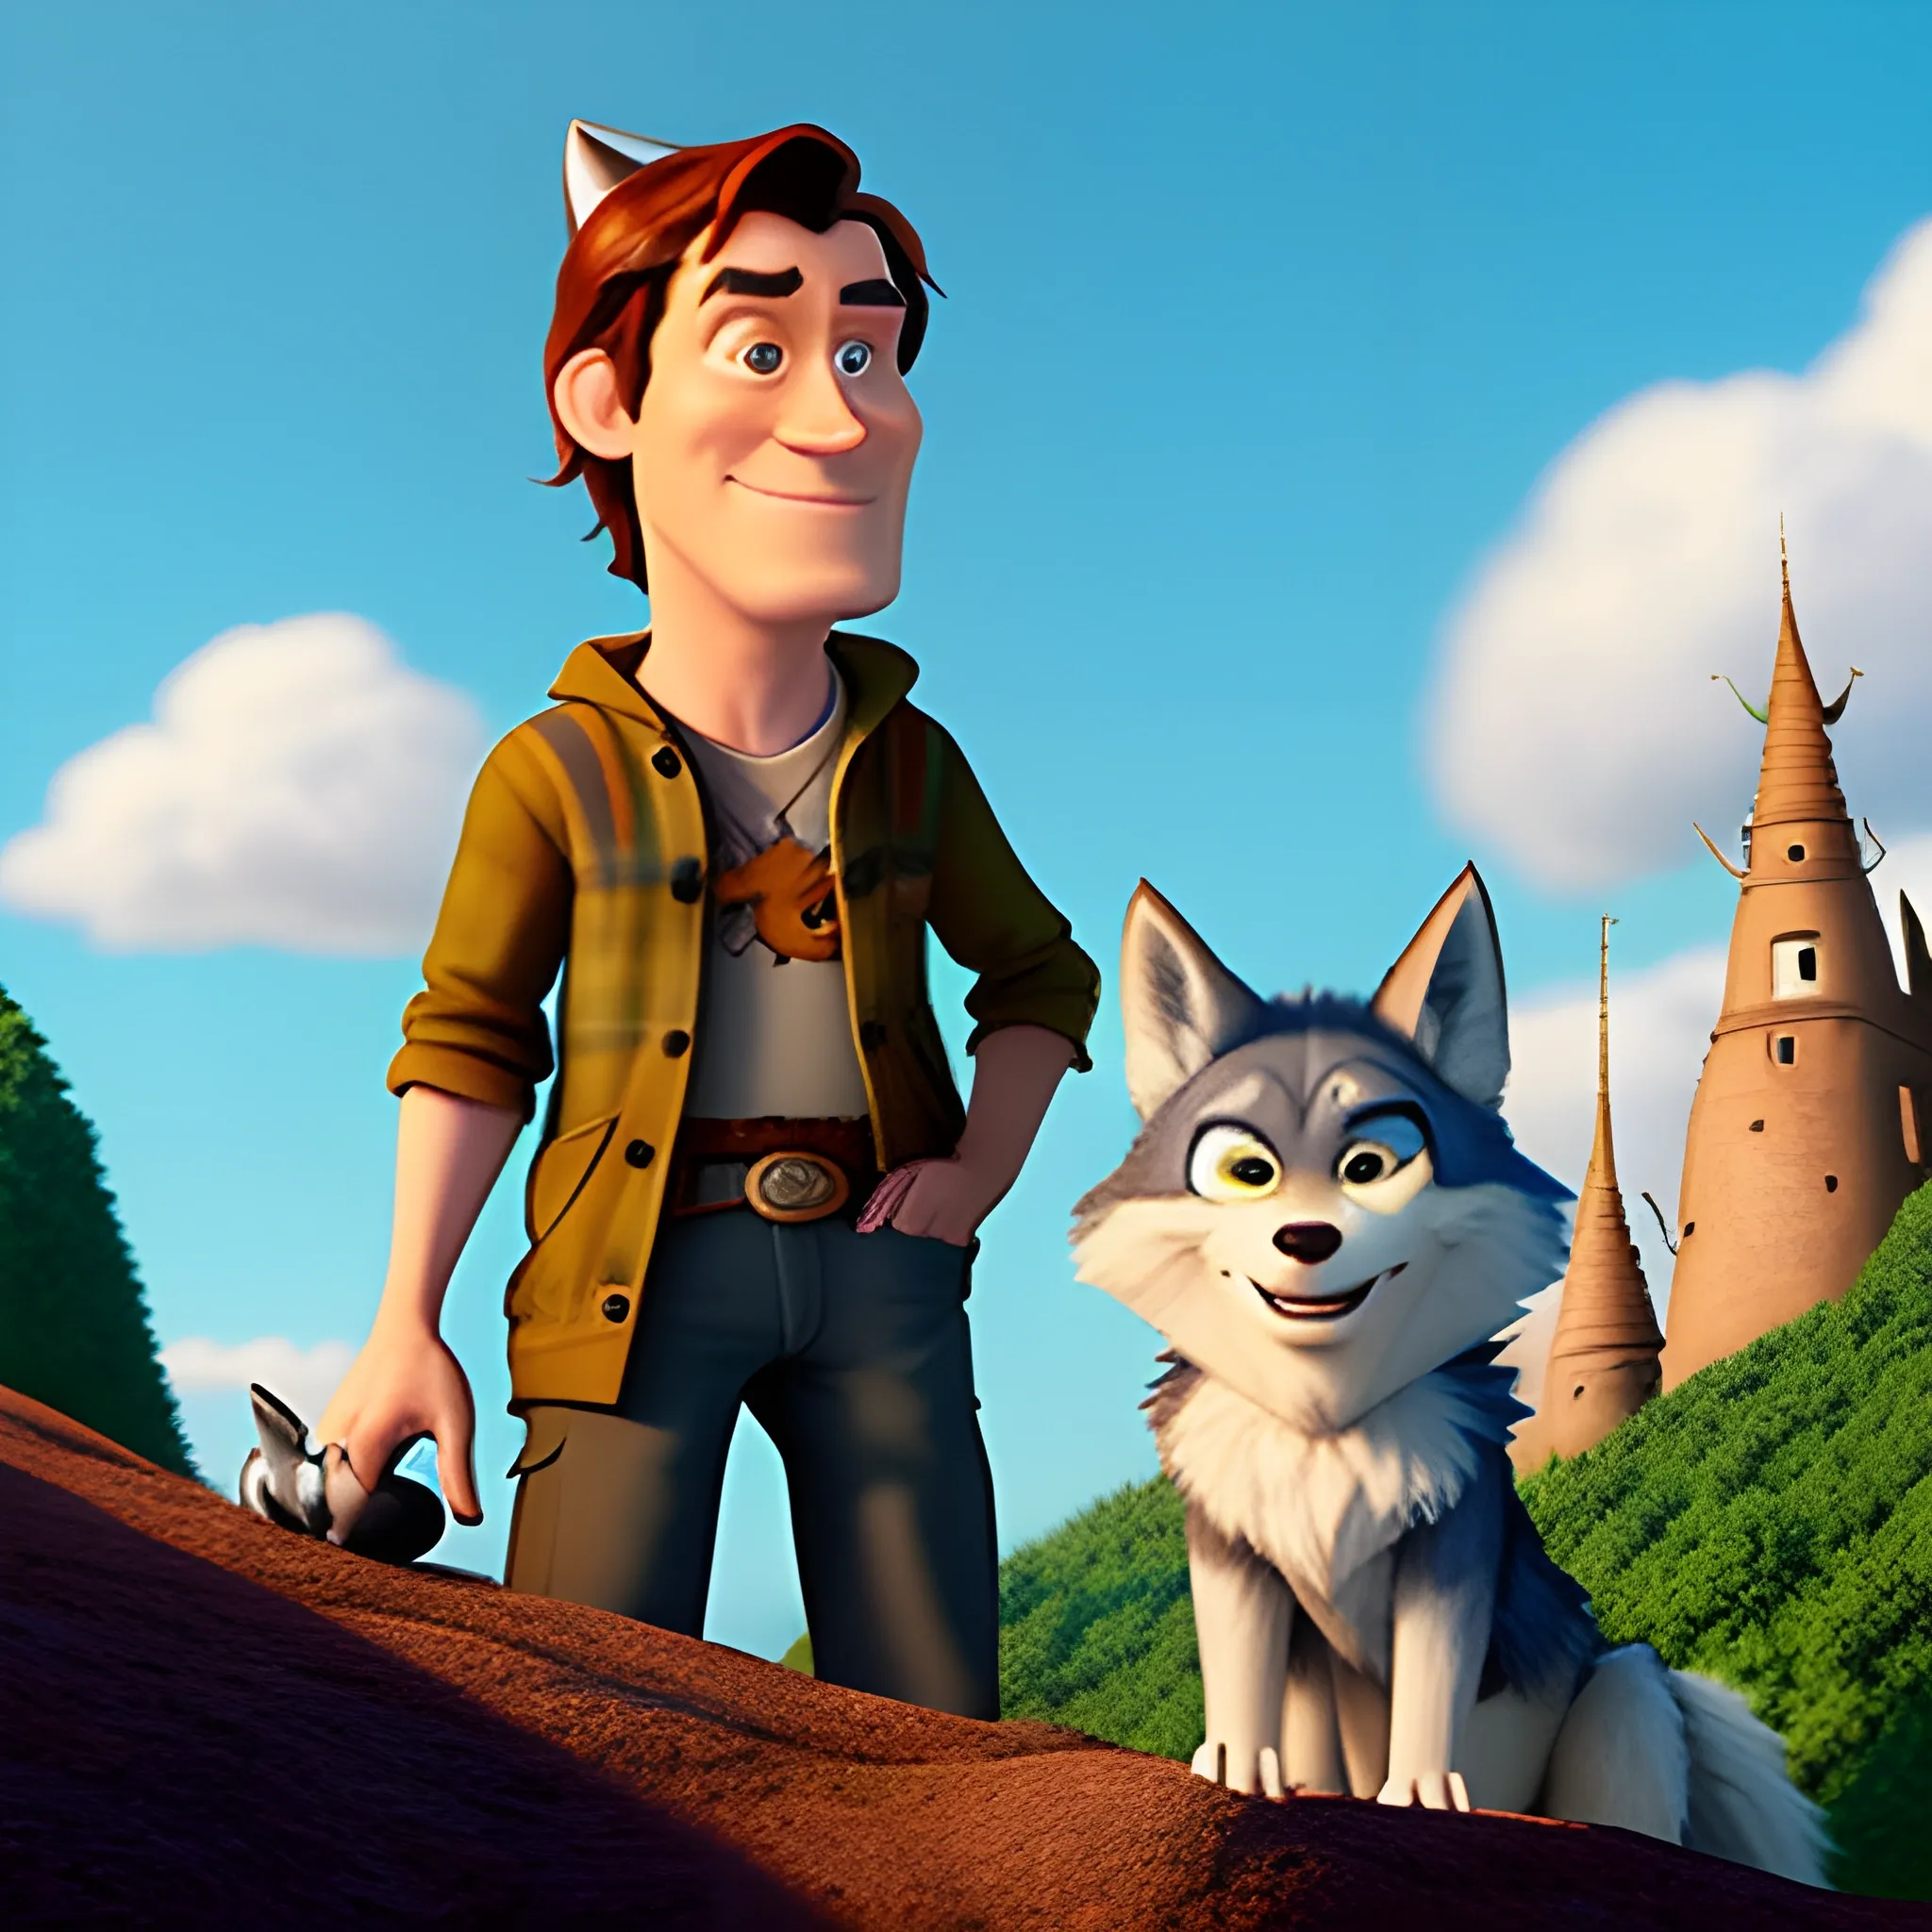 pixar's UP, starring a young boy and his pet wolf